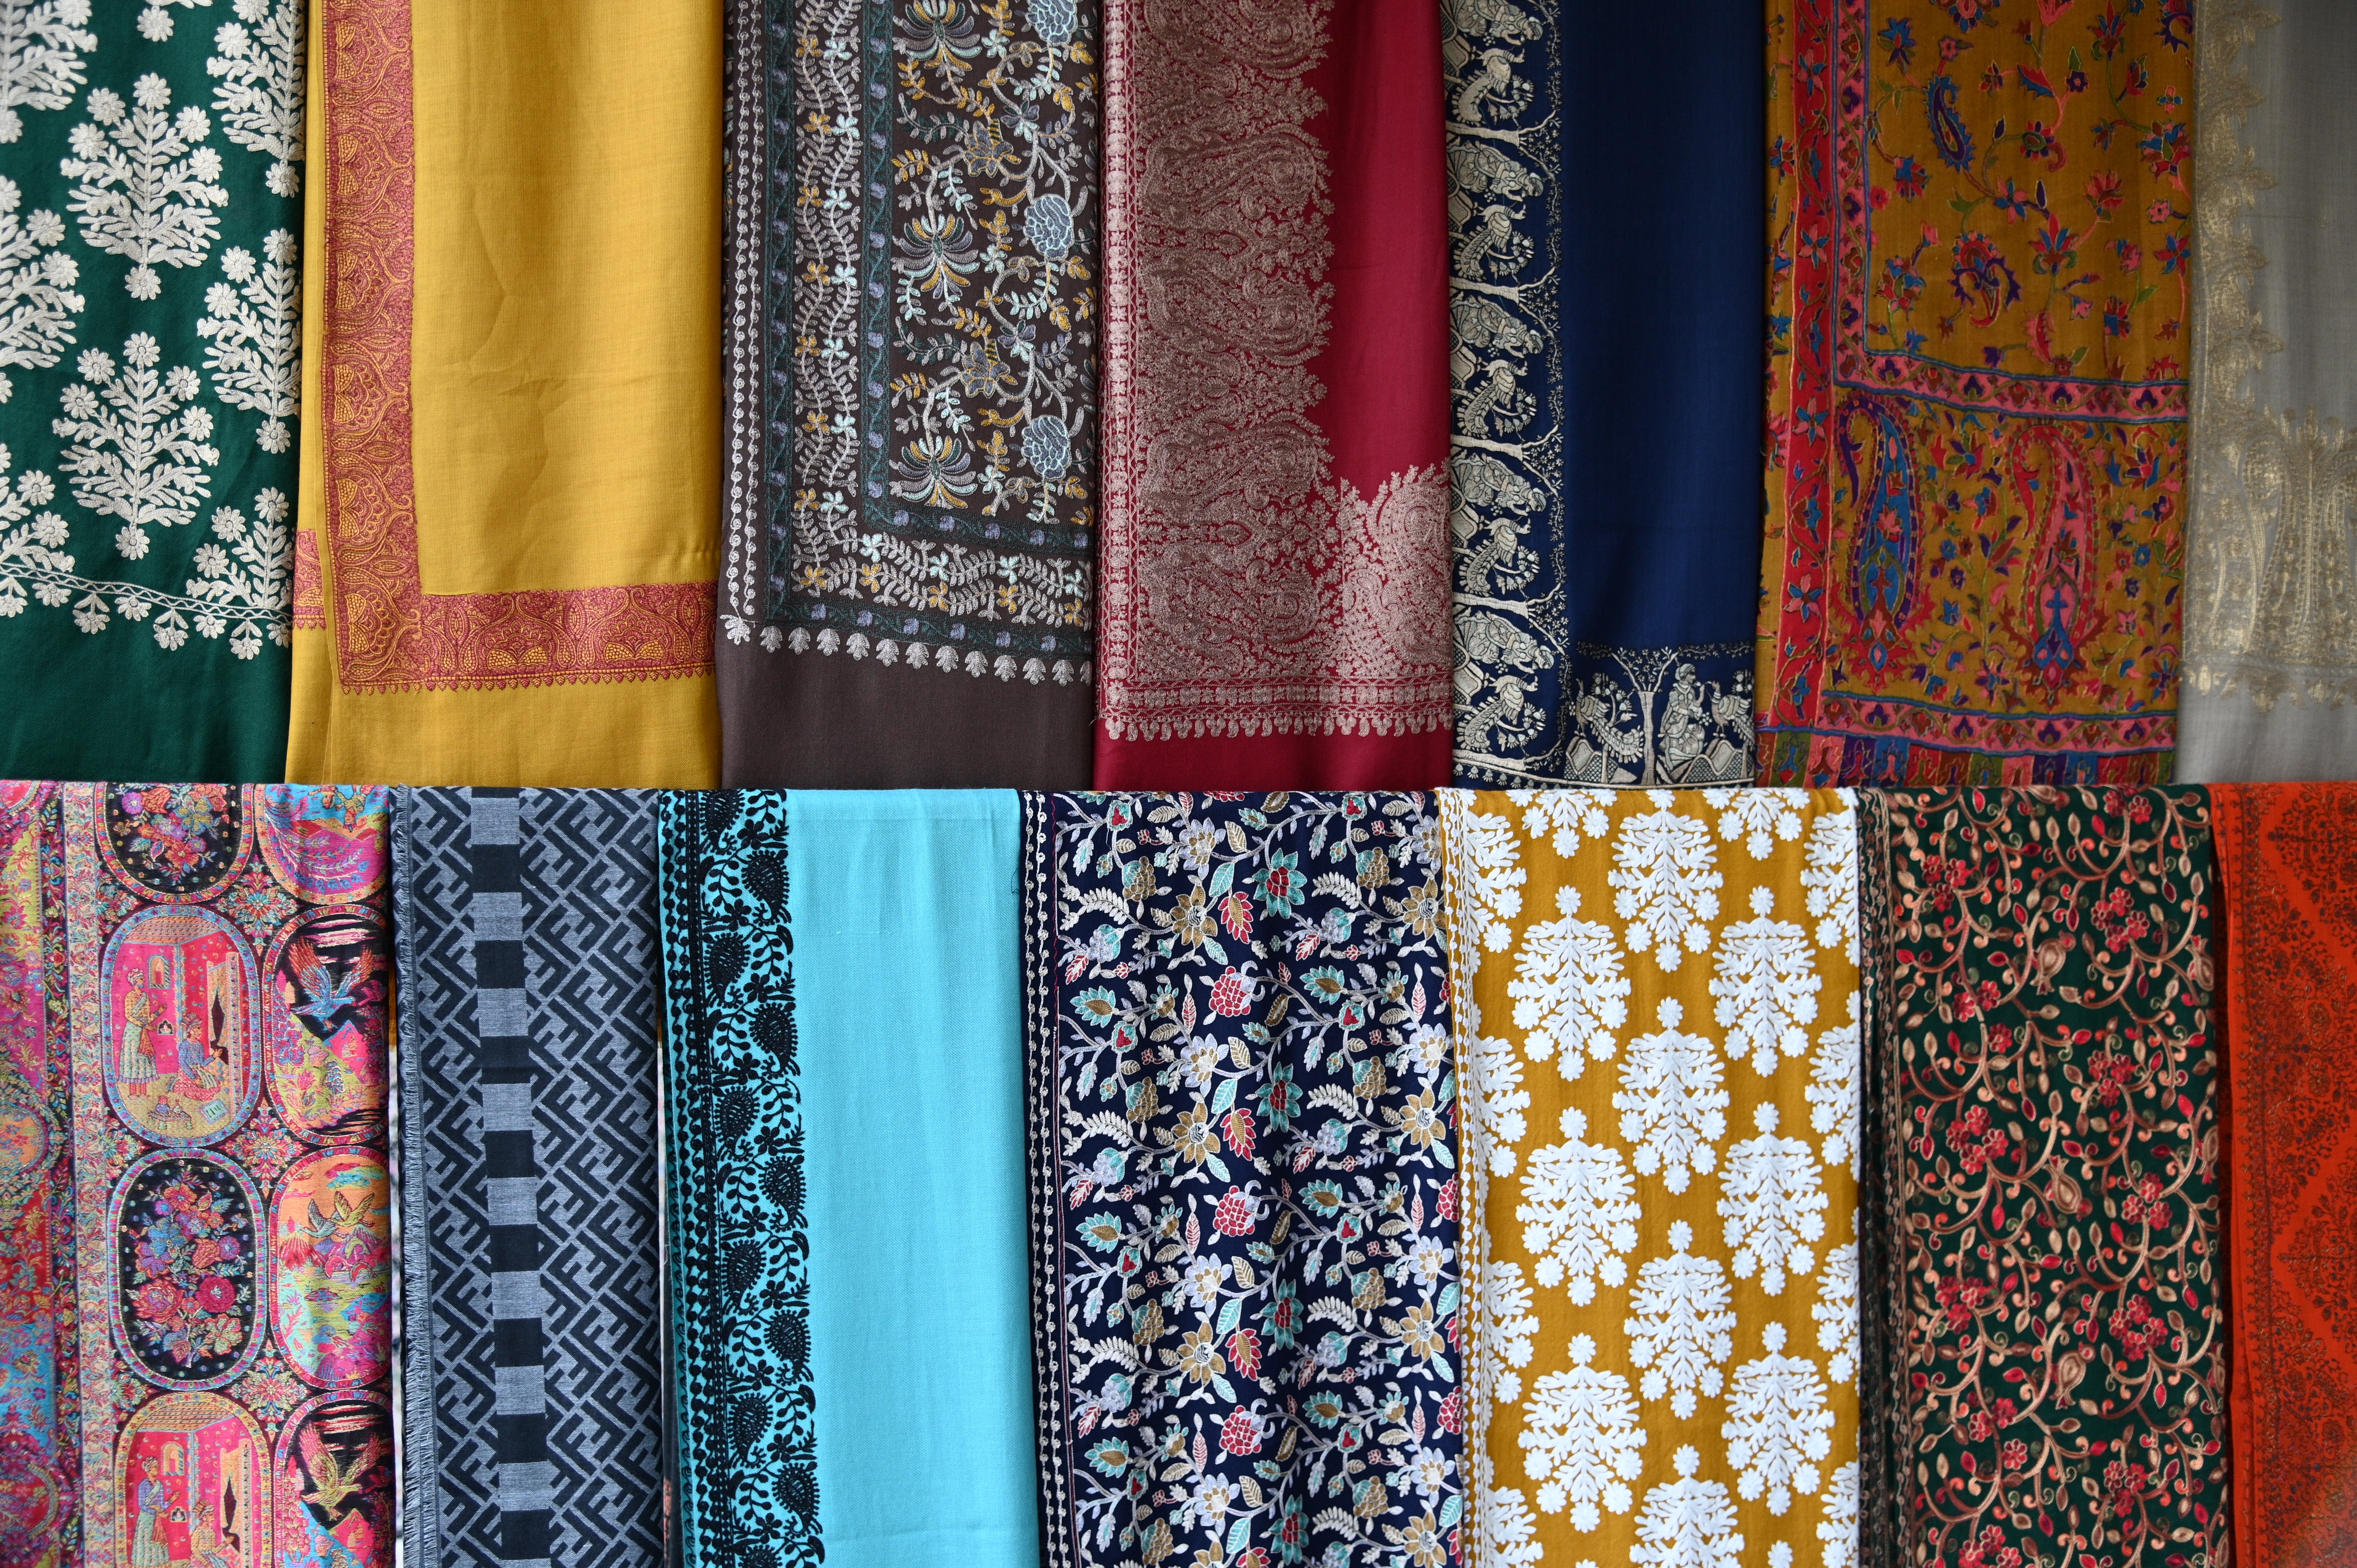 Colorful collection of woolen shawls :the best quality shawls made from Pashm or Pashmina in Kashmir